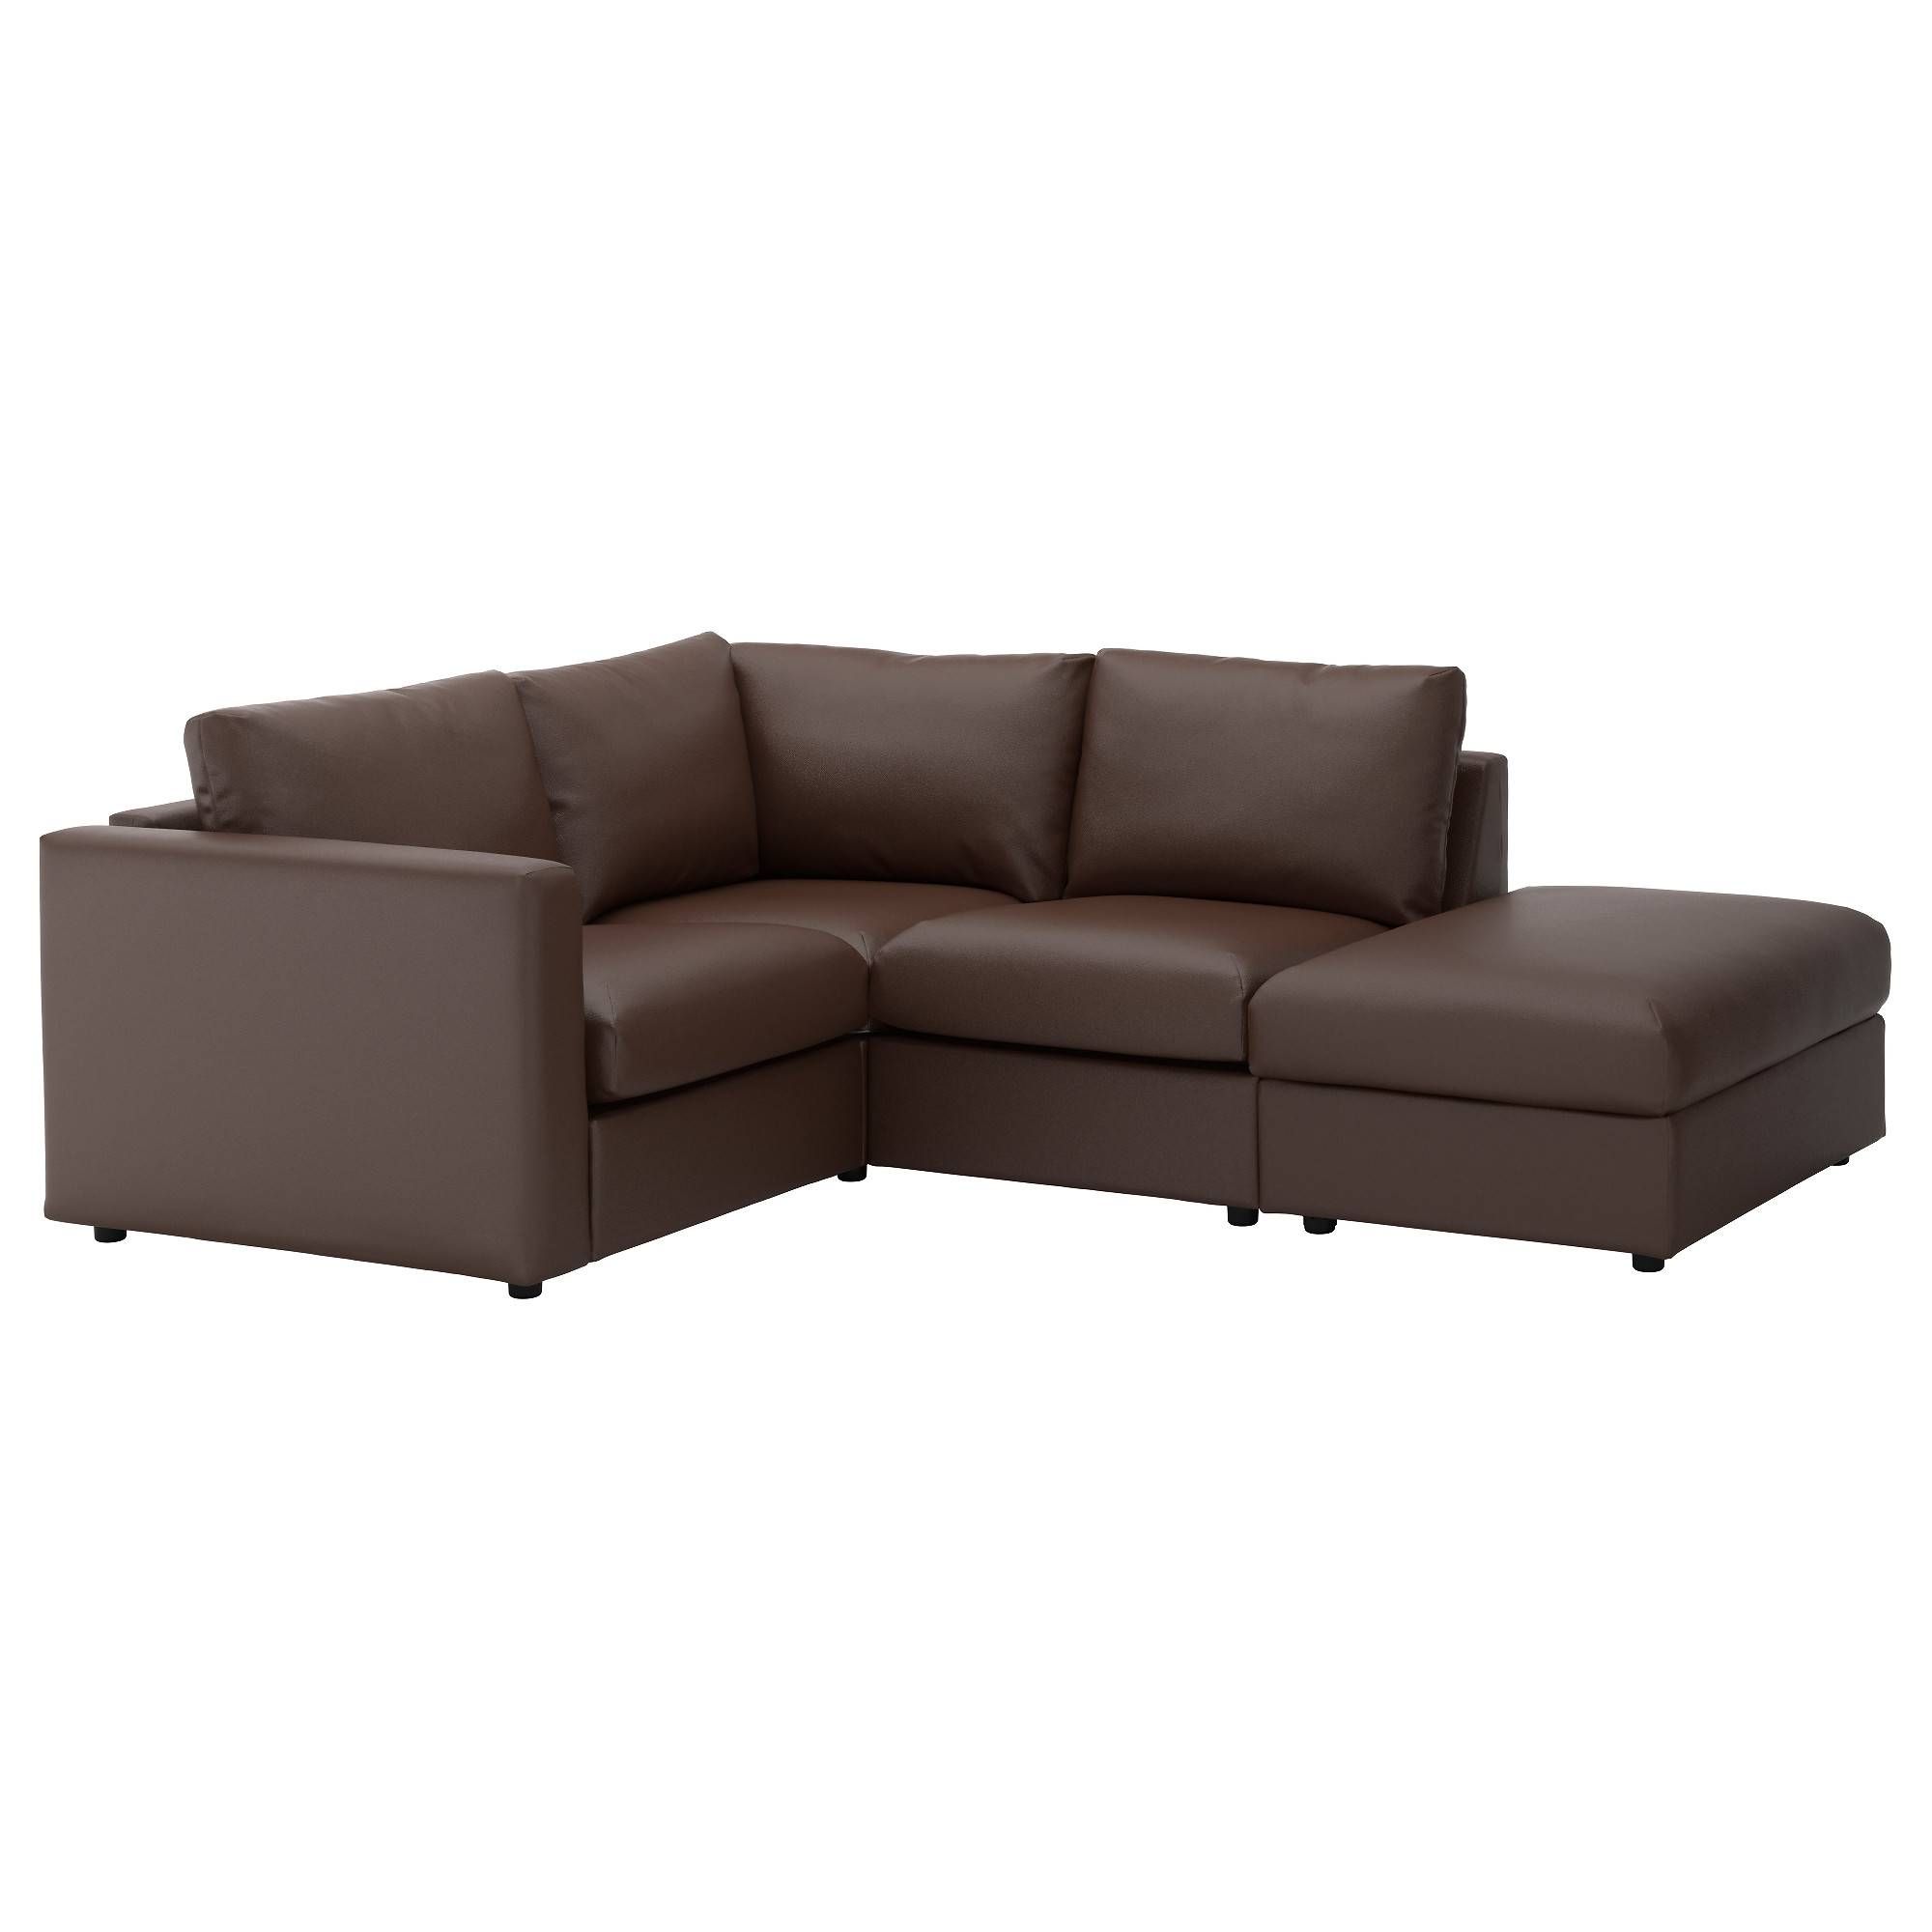 Leather & Faux Leather Couches, Chairs & Ottomans – Ikea Pertaining To Small Brown Leather Corner Sofas (View 17 of 30)